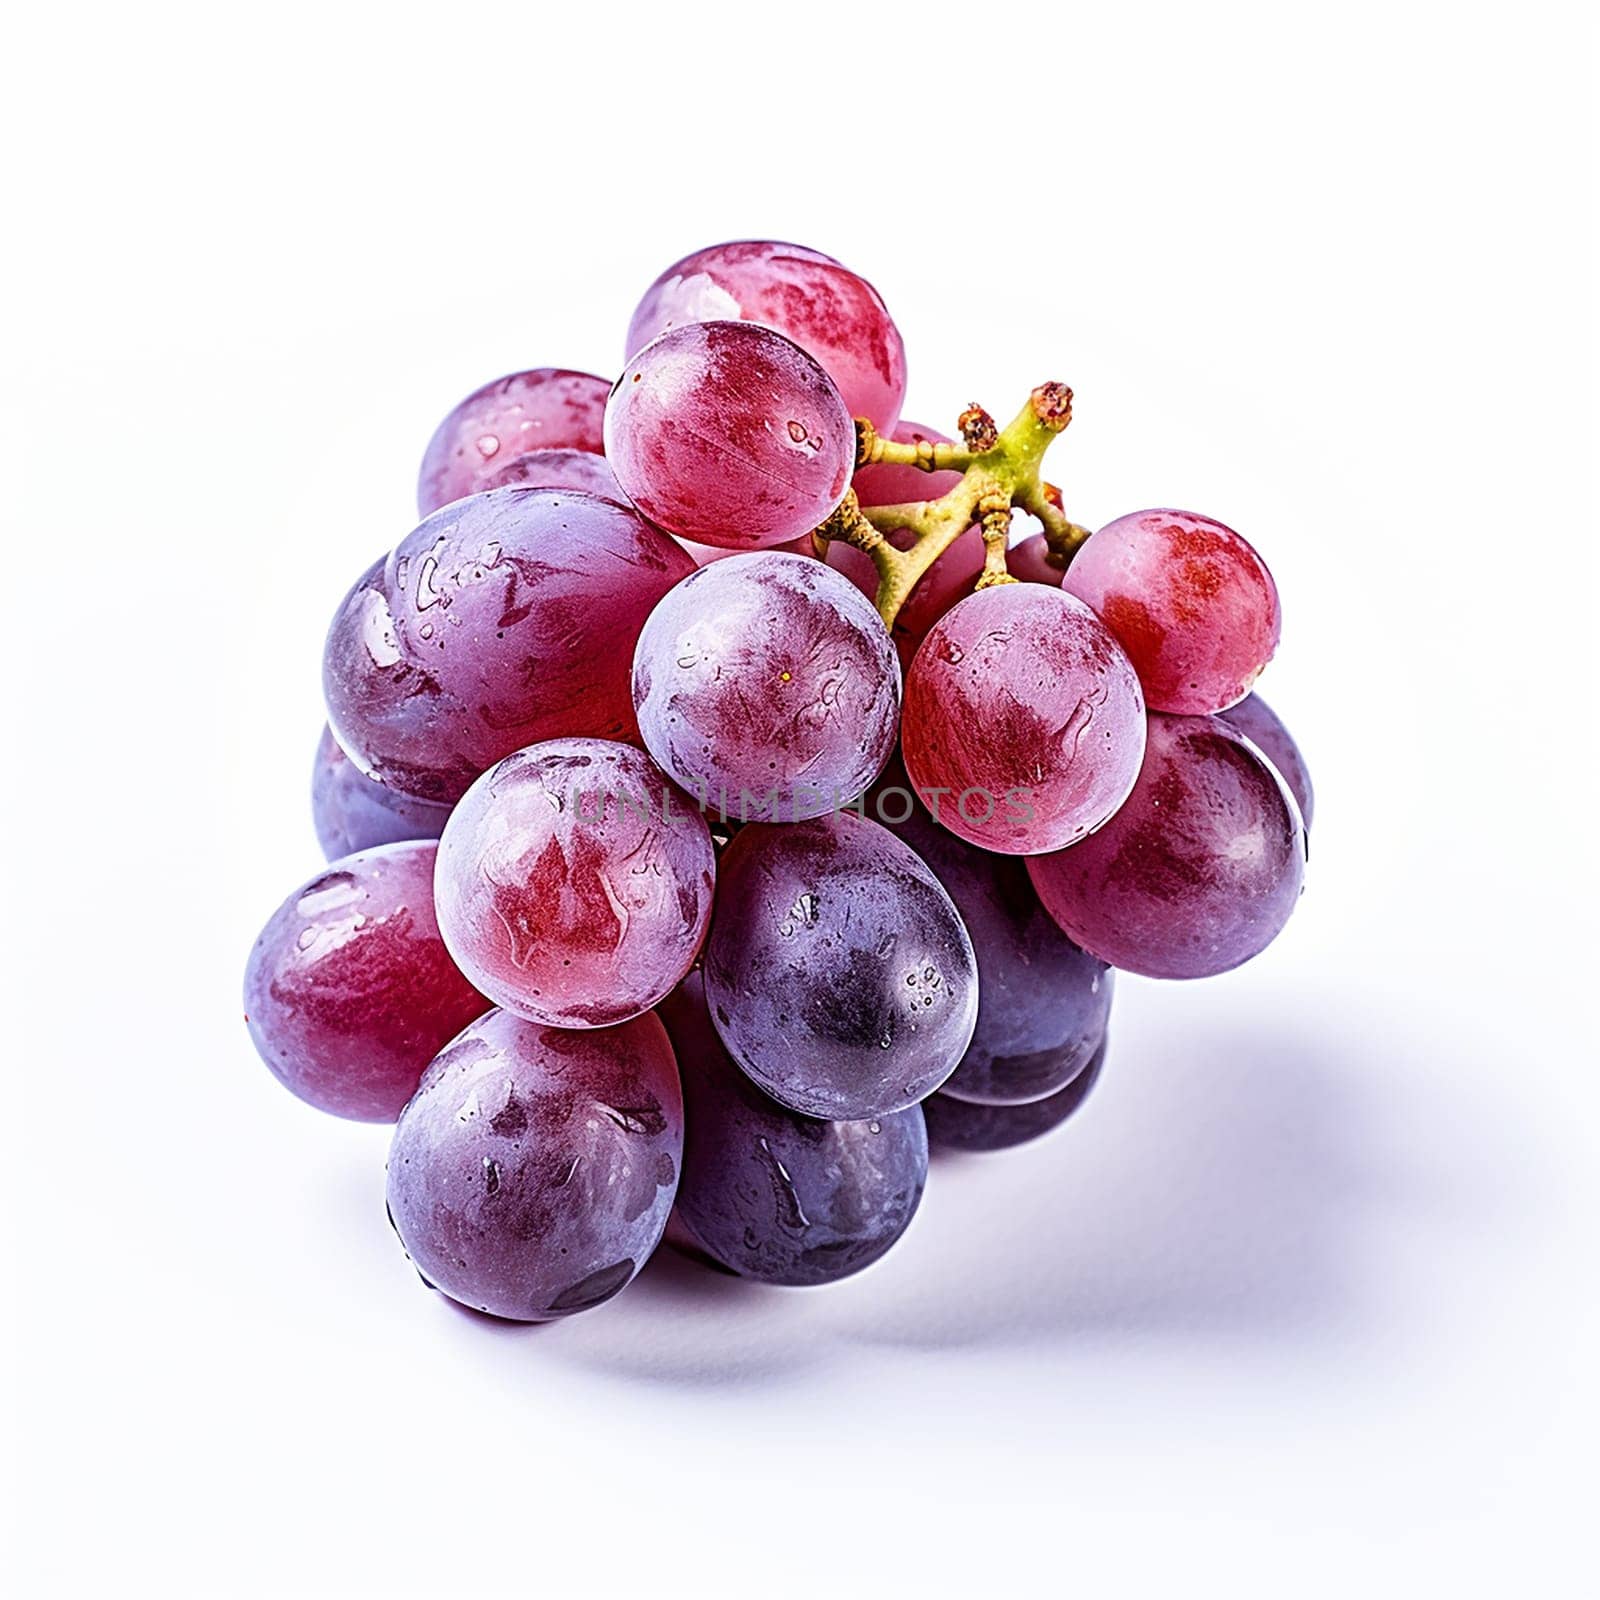 Ripe purple grapes bunch isolated on white background